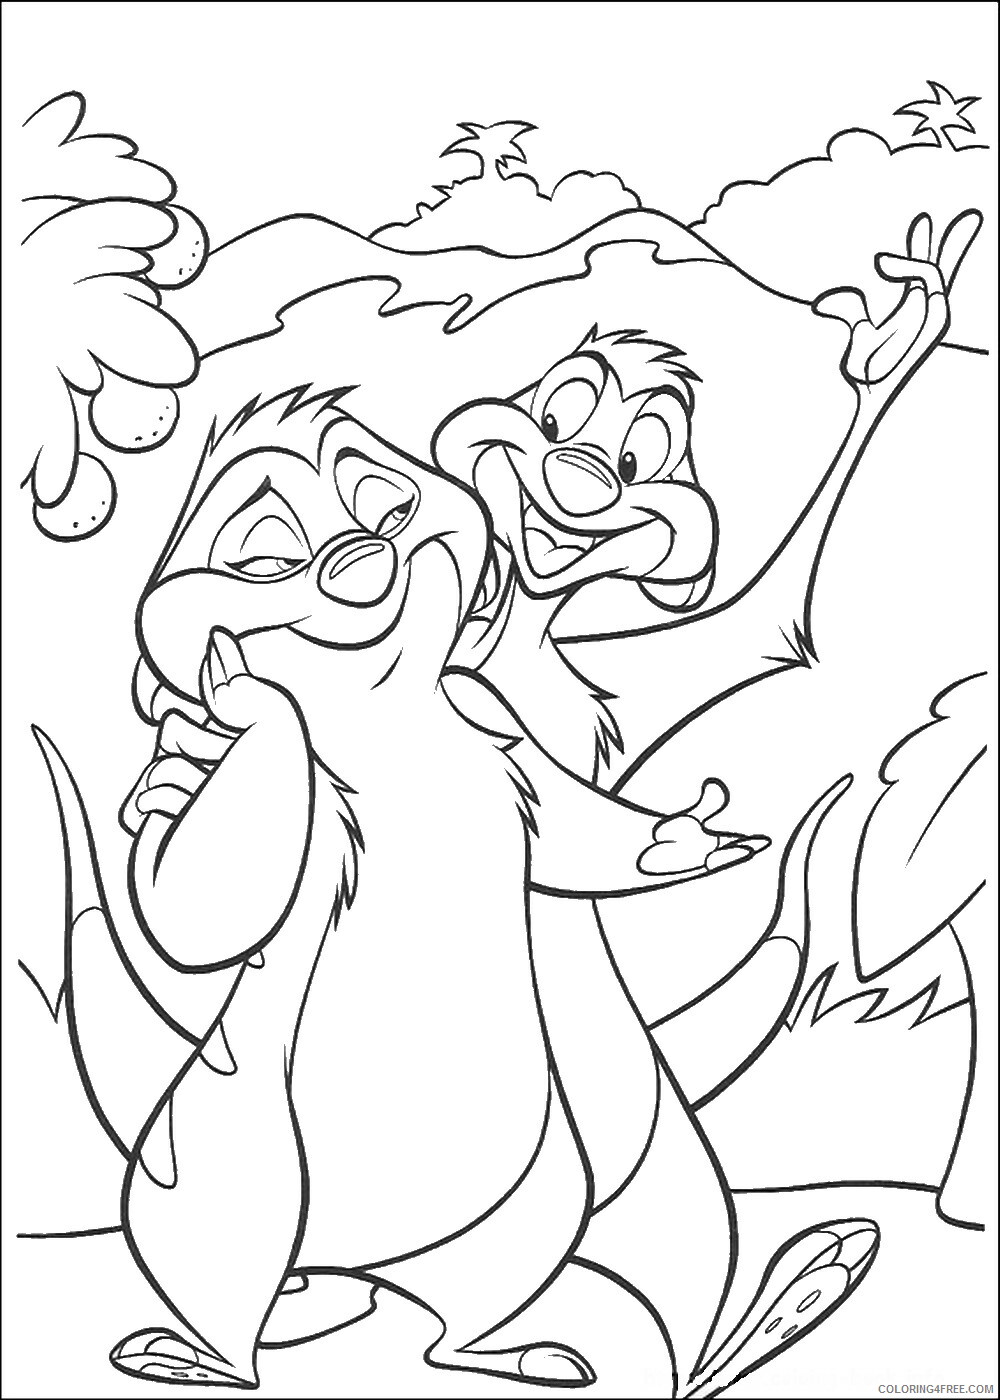 The Lion King Coloring Pages TV Film lionking_108 Printable 2020 09148 Coloring4free